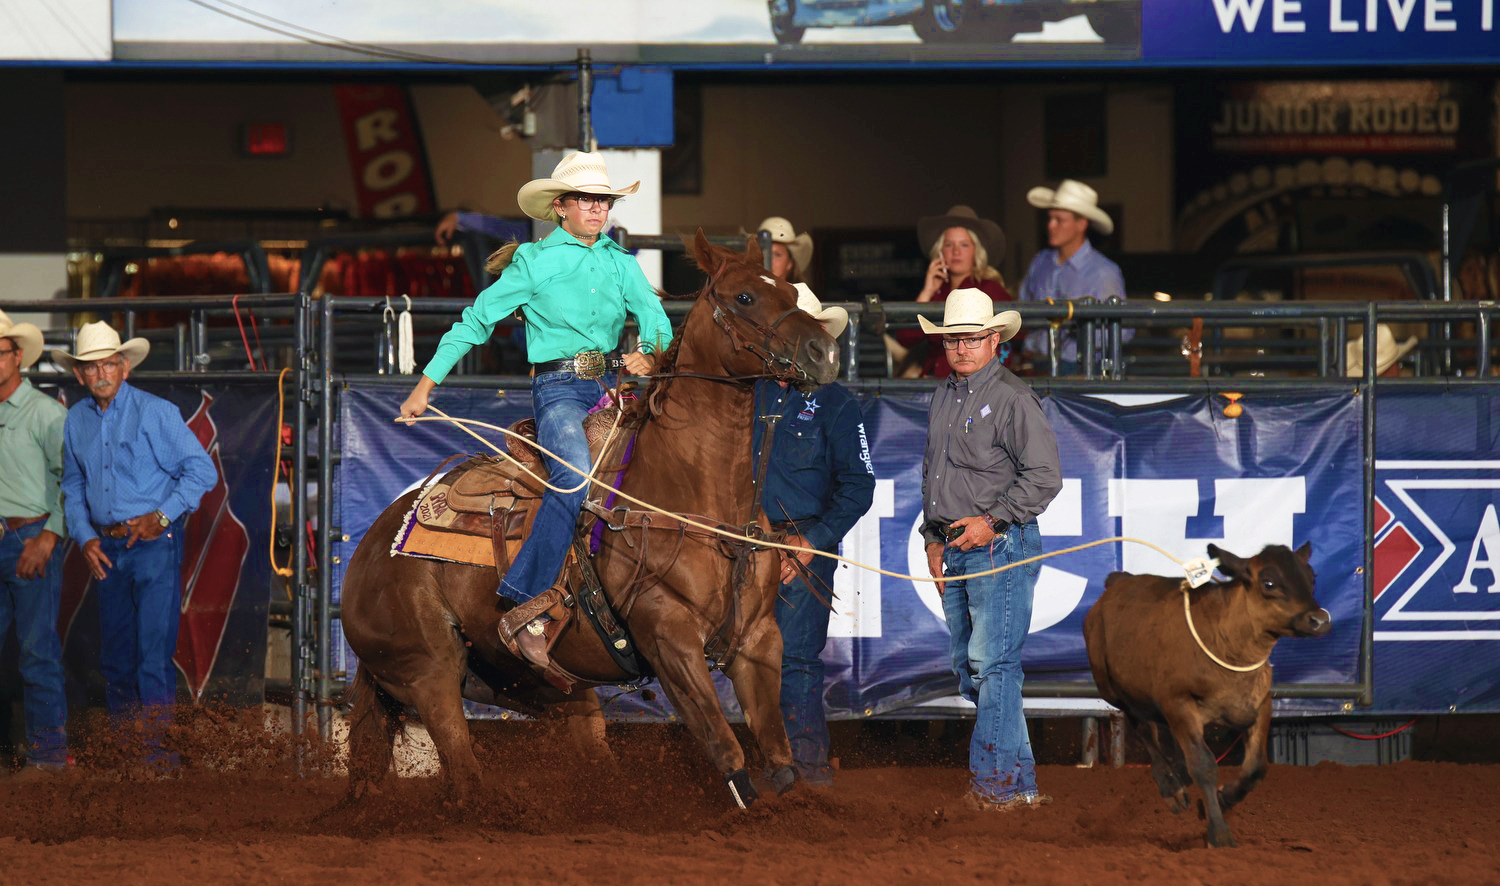 Everything to Know About the 2023 Cinch Timed Event Championship - The Team  Roping Journal